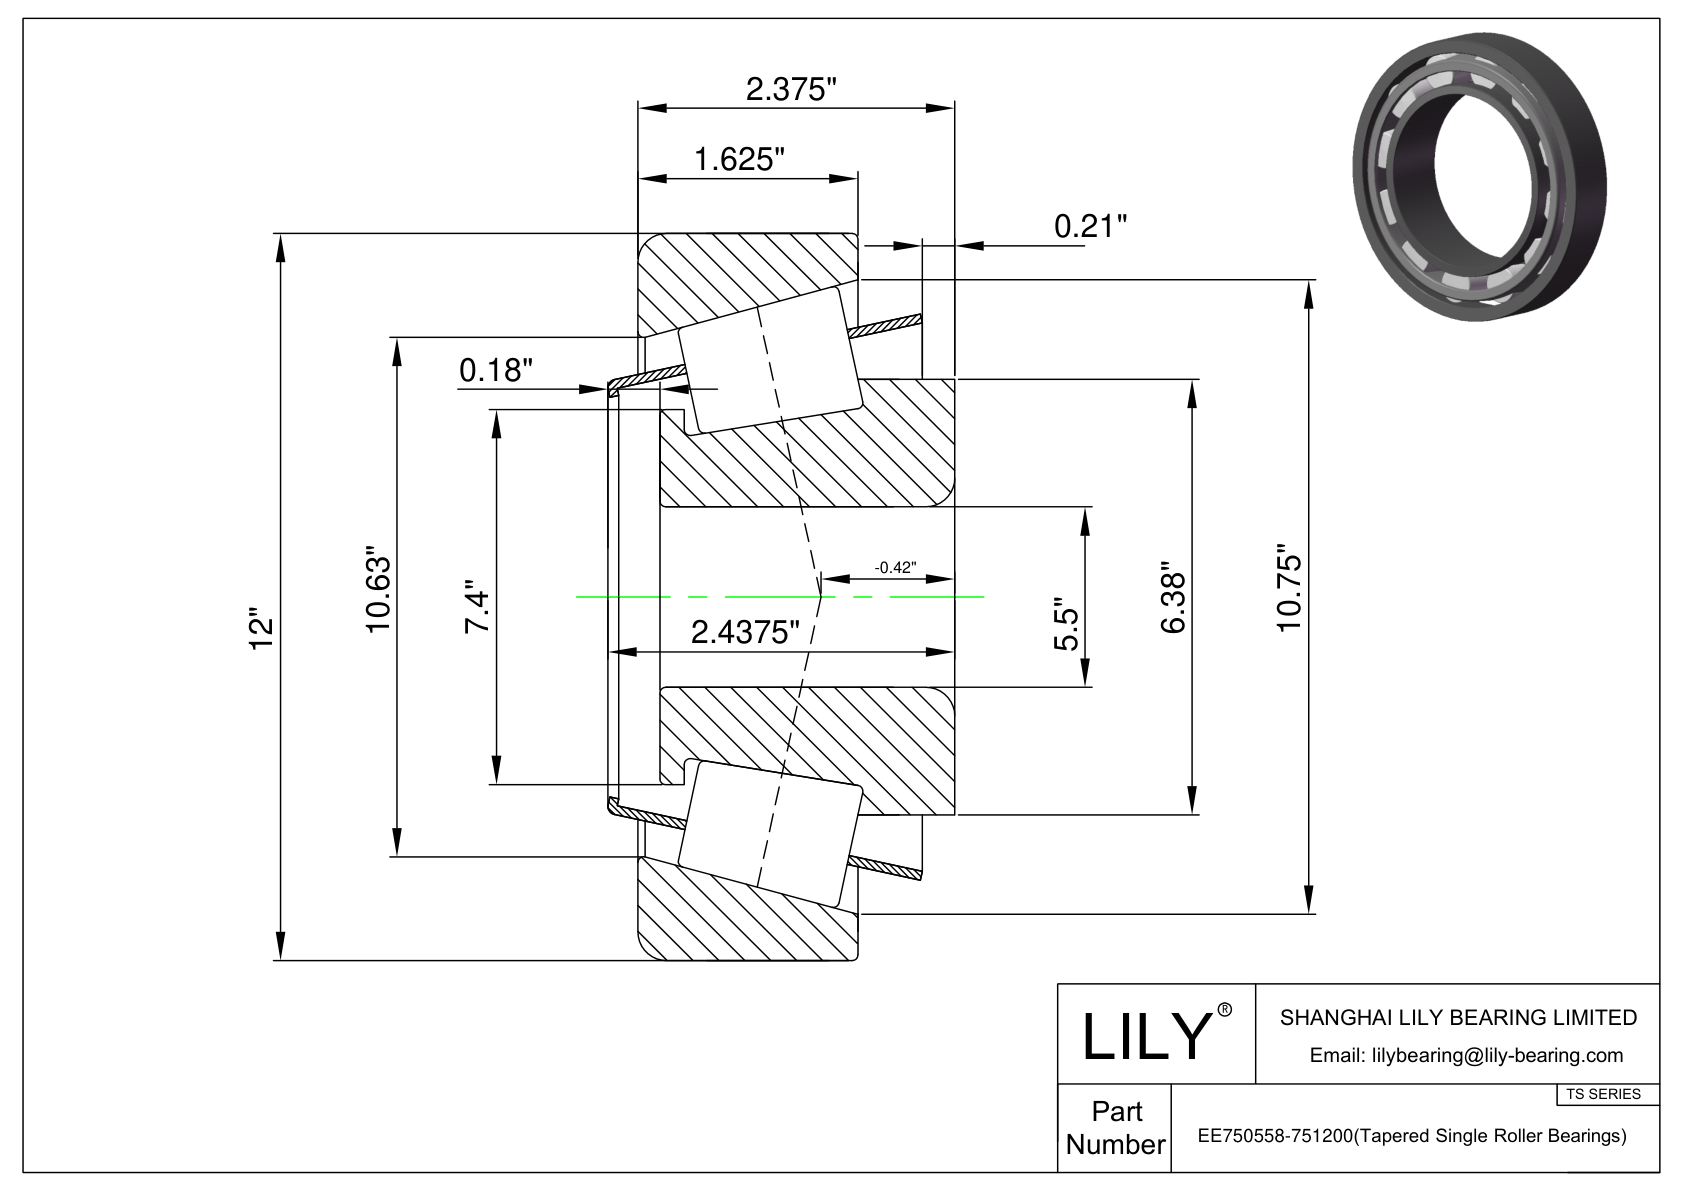 EE750558-751200 TS (Tapered Single Roller Bearings) (Imperial) cad drawing